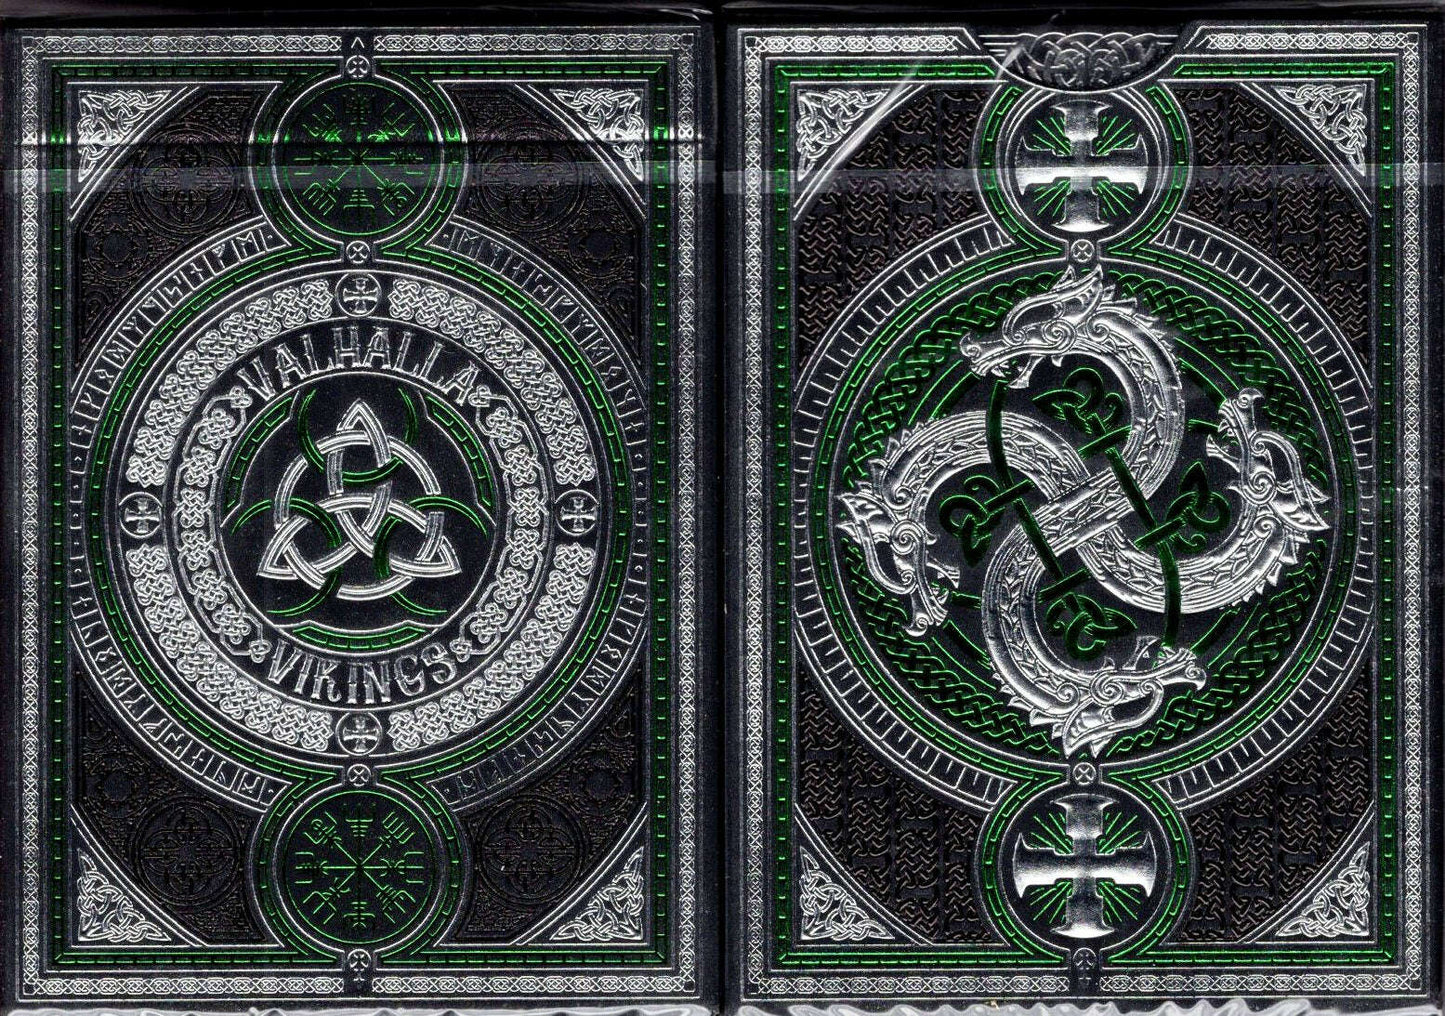 PlayingCardDecks.com-Valhalla Viking Emerald Deluxe Playing Cards USPCC